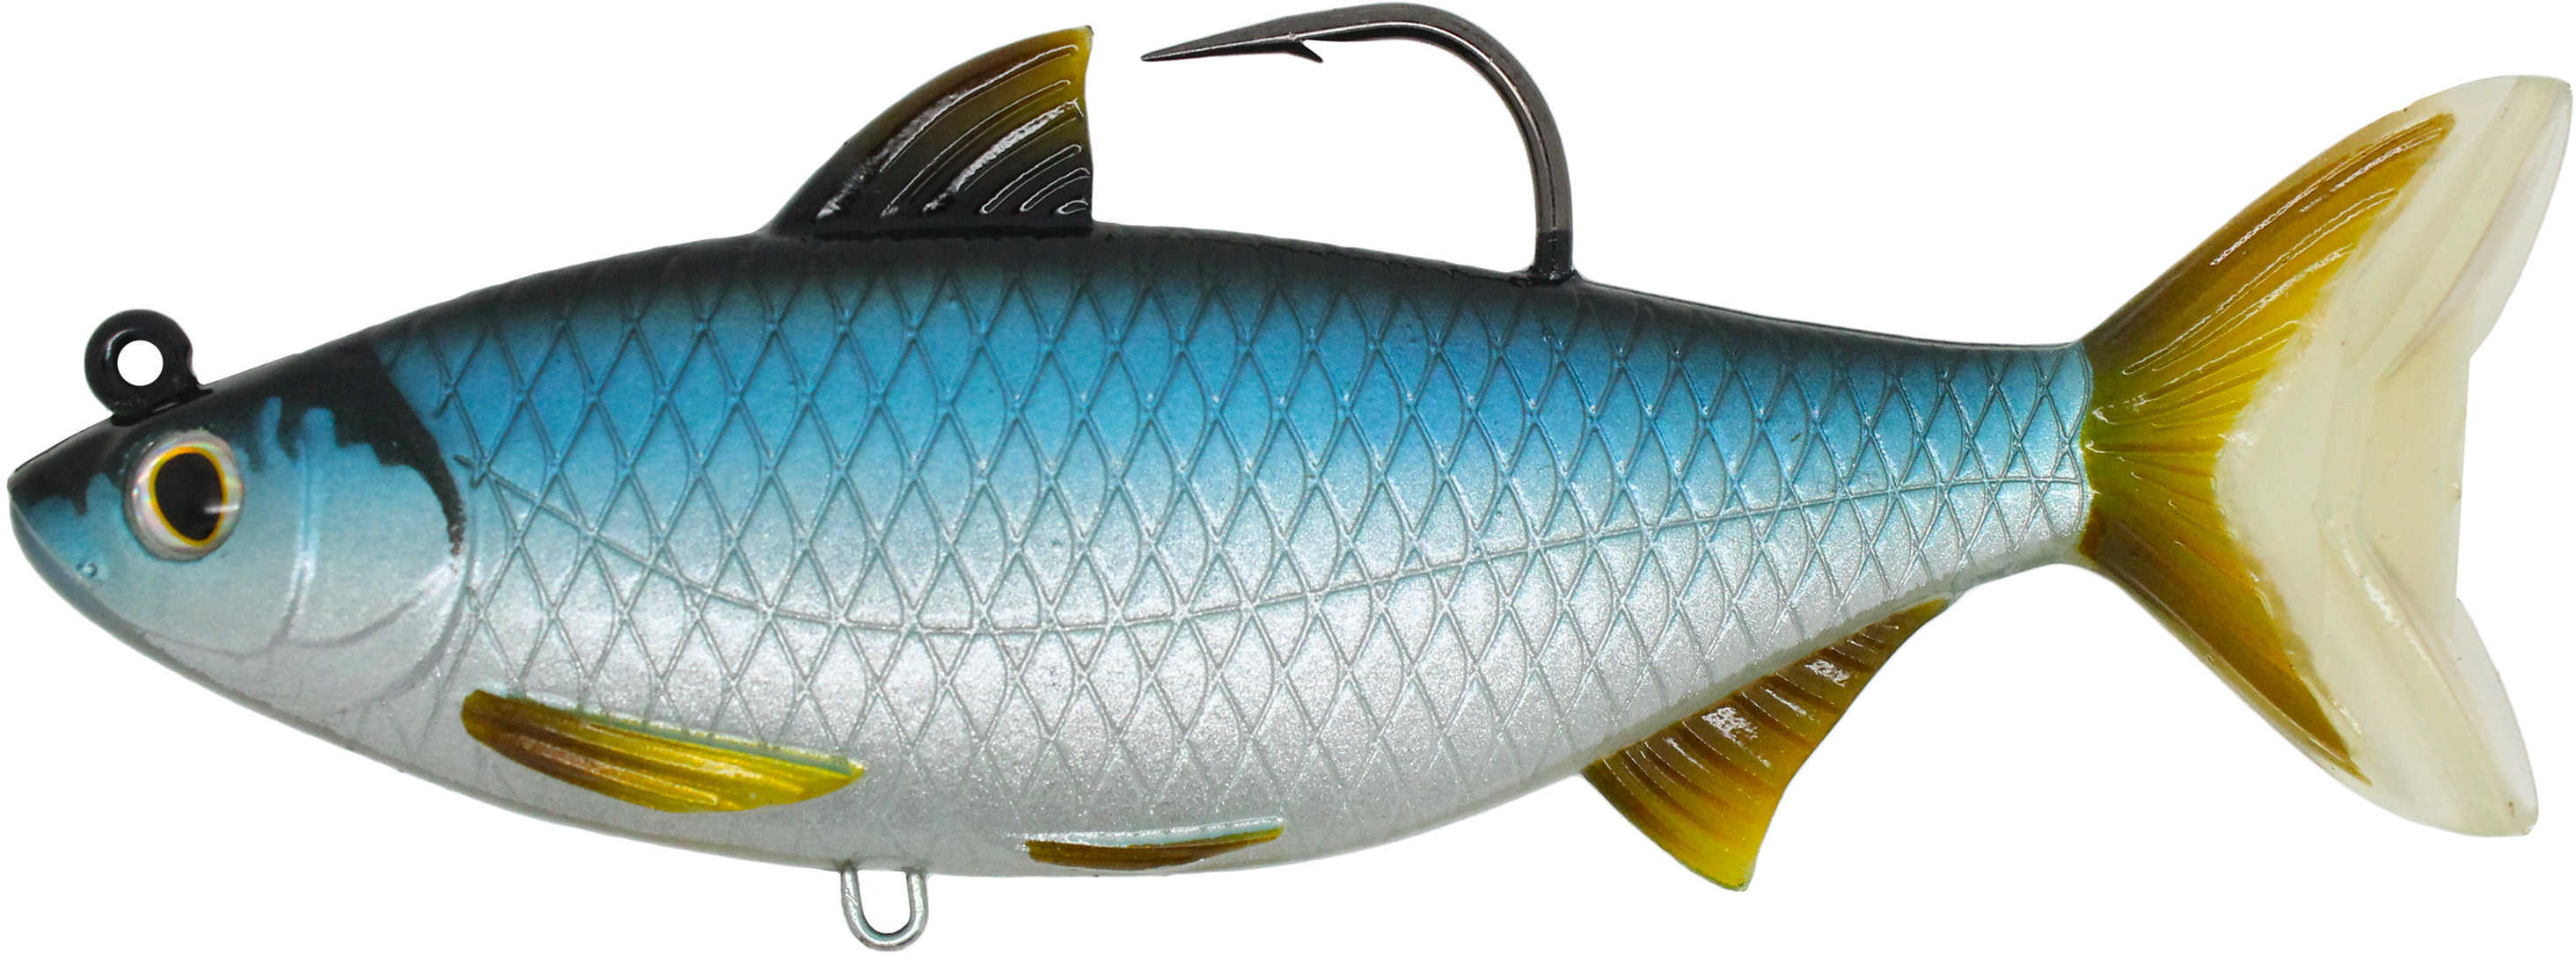 LIVETARGET Lures / Koppers Fishing and Tackle Corp LT GOLD SHINR SWIMBAIT 5.5" SIL/BLU